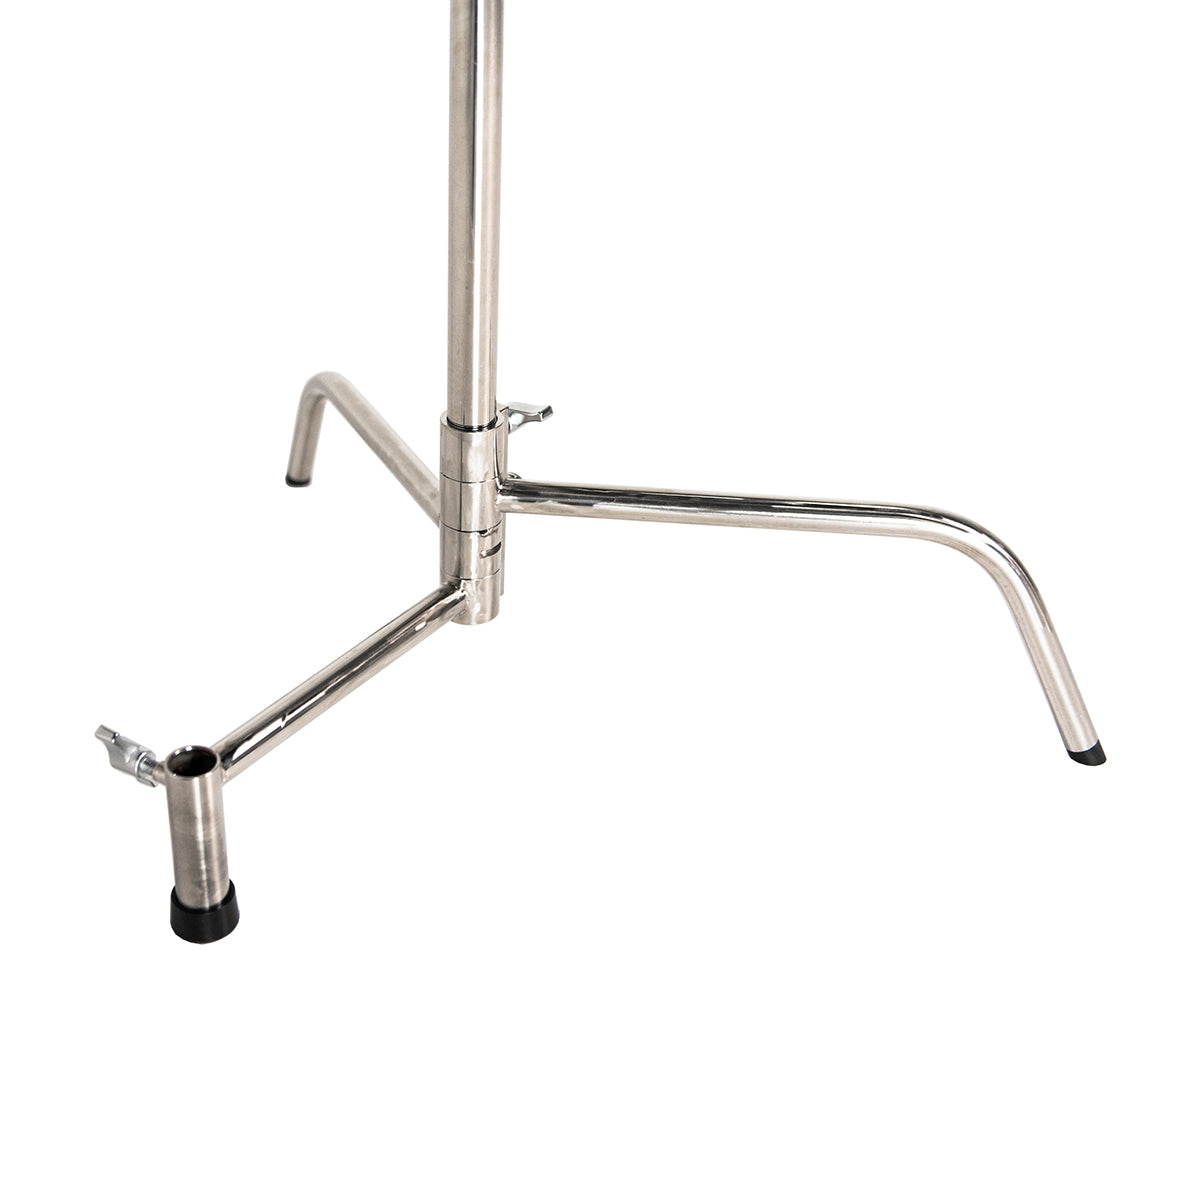 Savage 40” Stainless Steel C-Stand with Grip Arm Kit